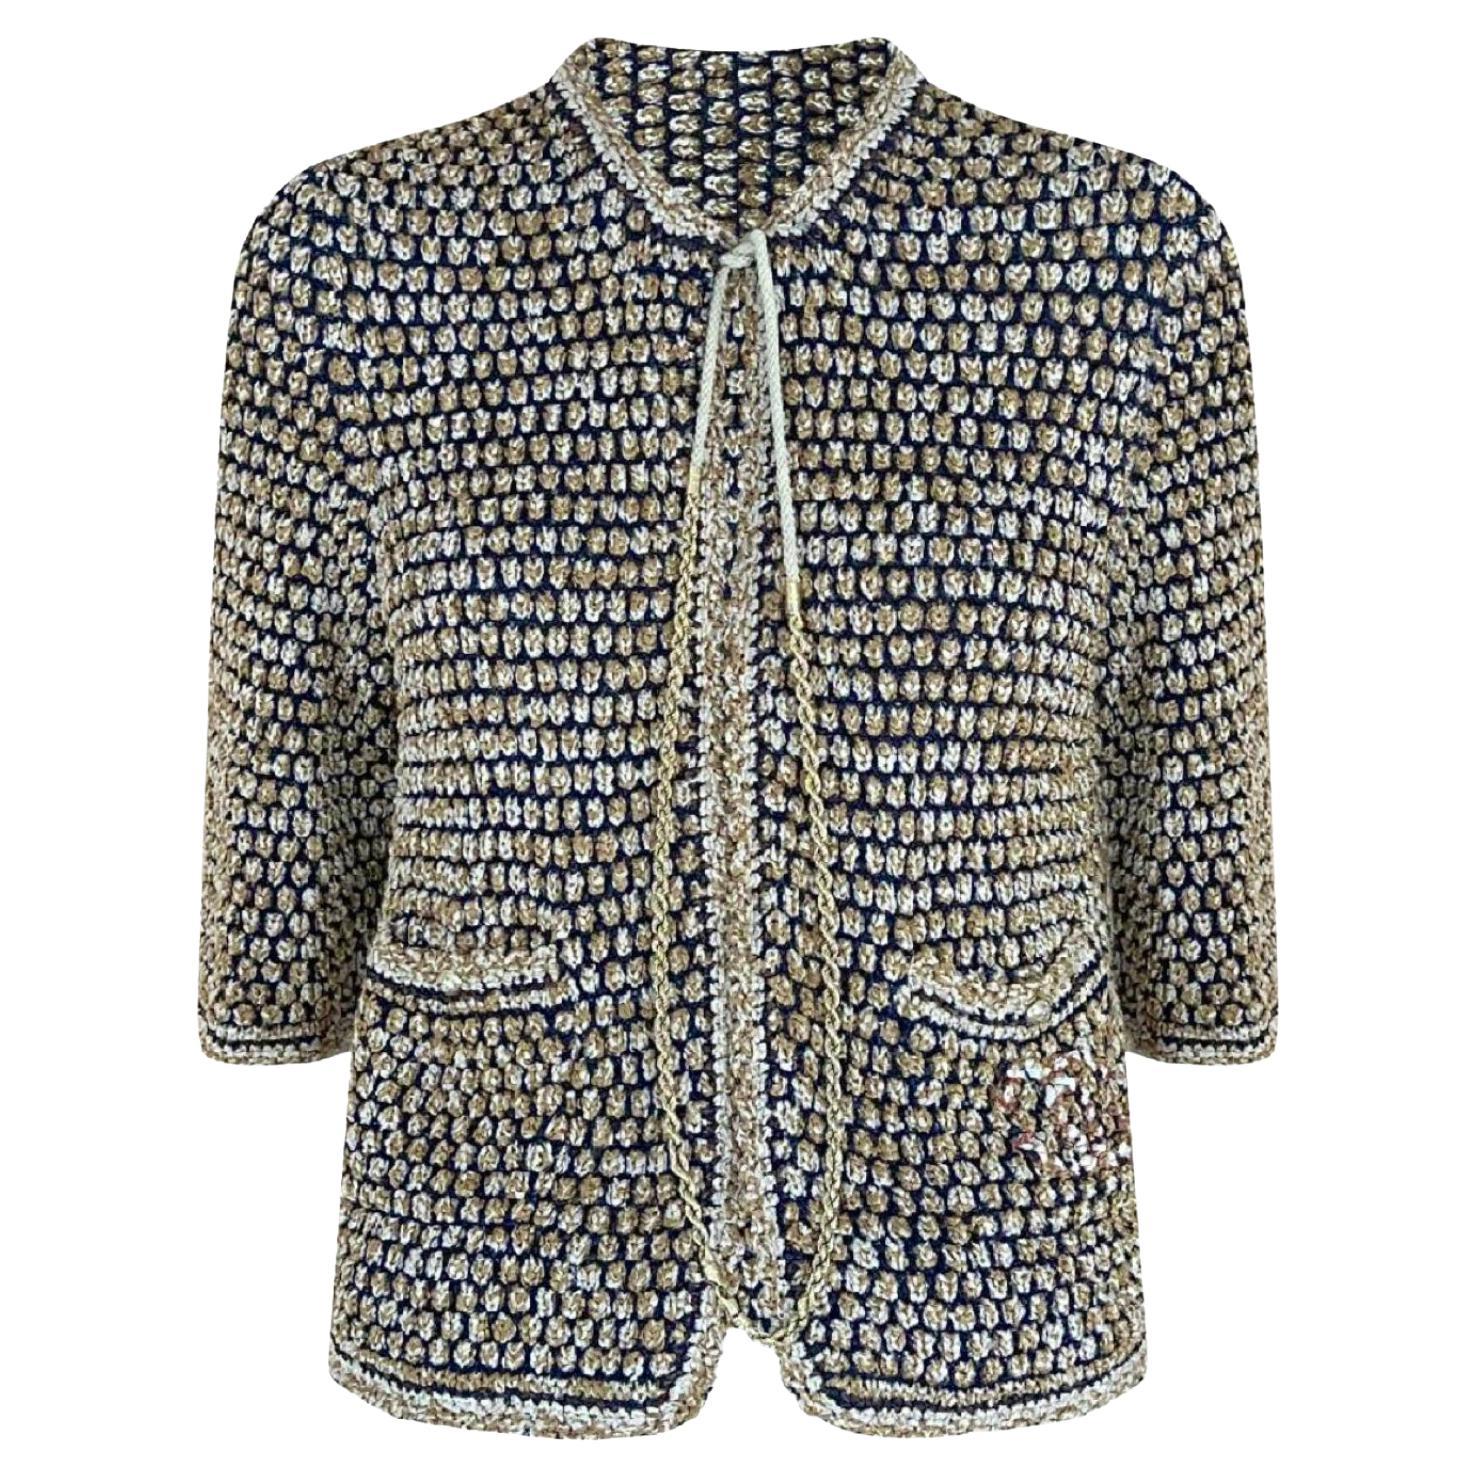 Chanel CC Patch and Chain Link Detail Cardi Jacket